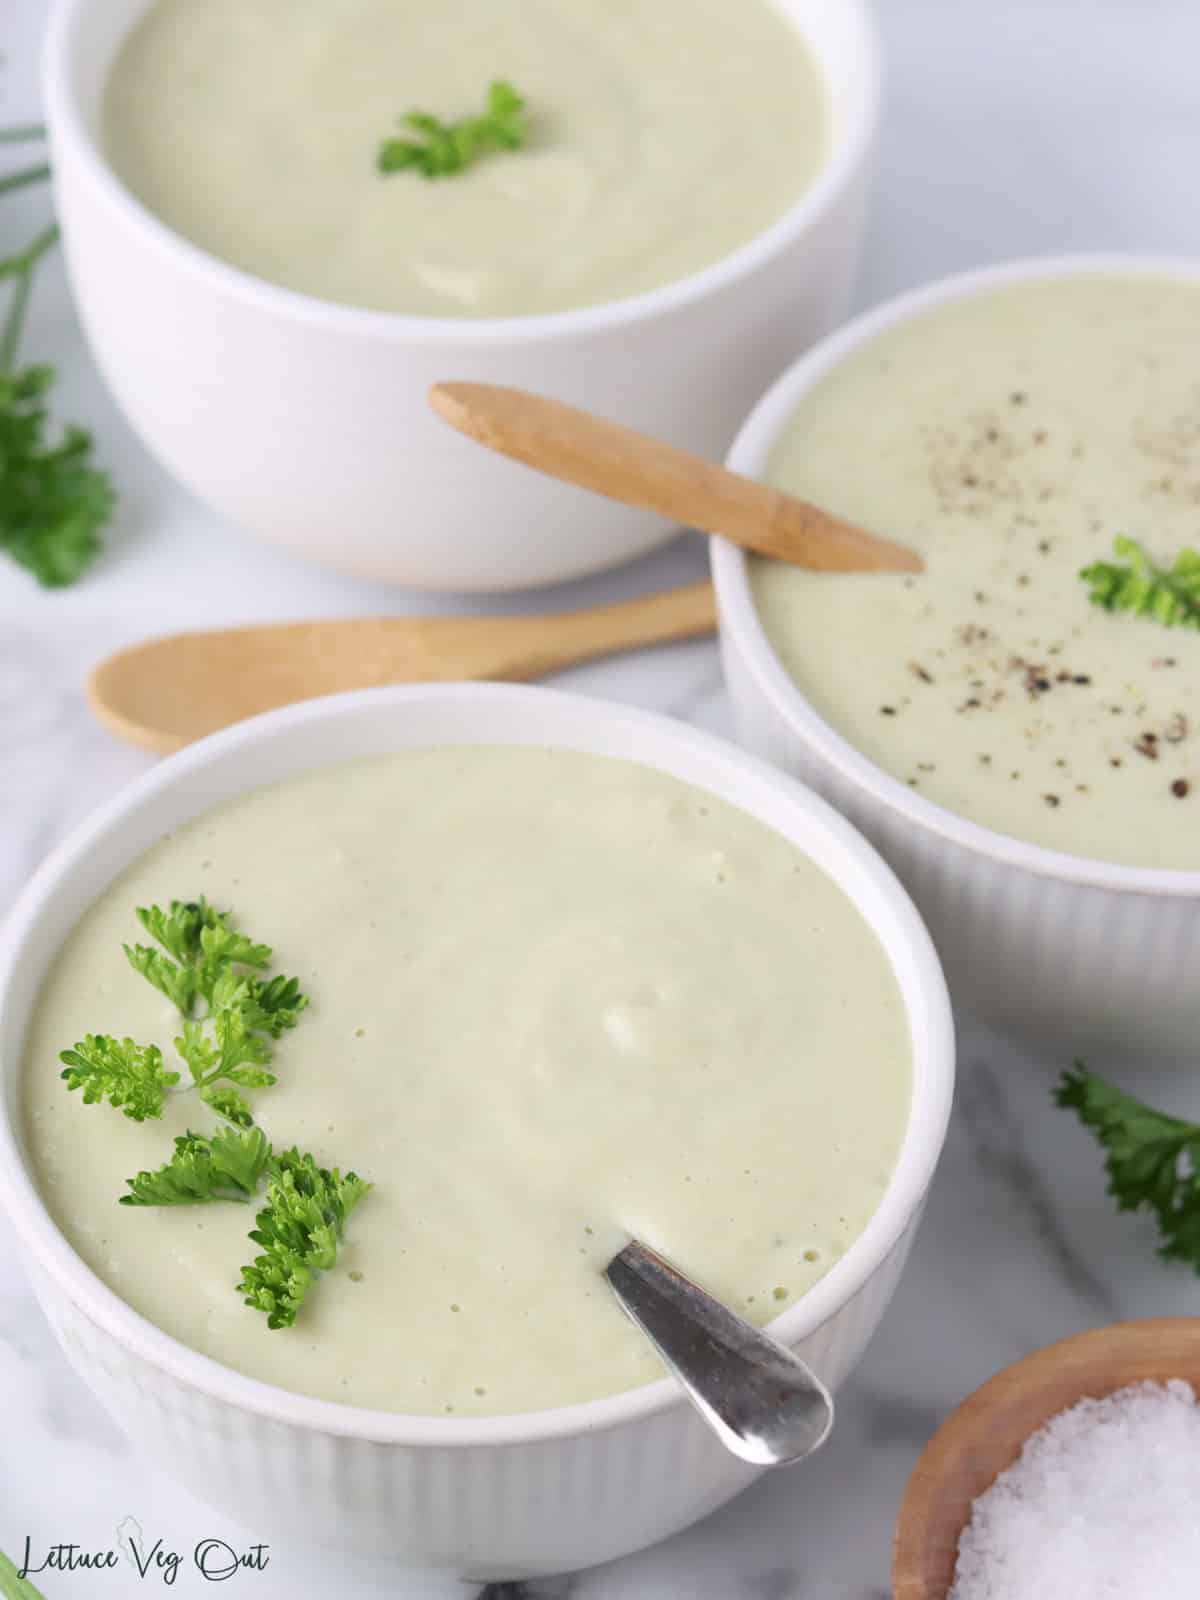 White bowl of creamy celery soup with parsley garnish and two other bowls blurred in background.